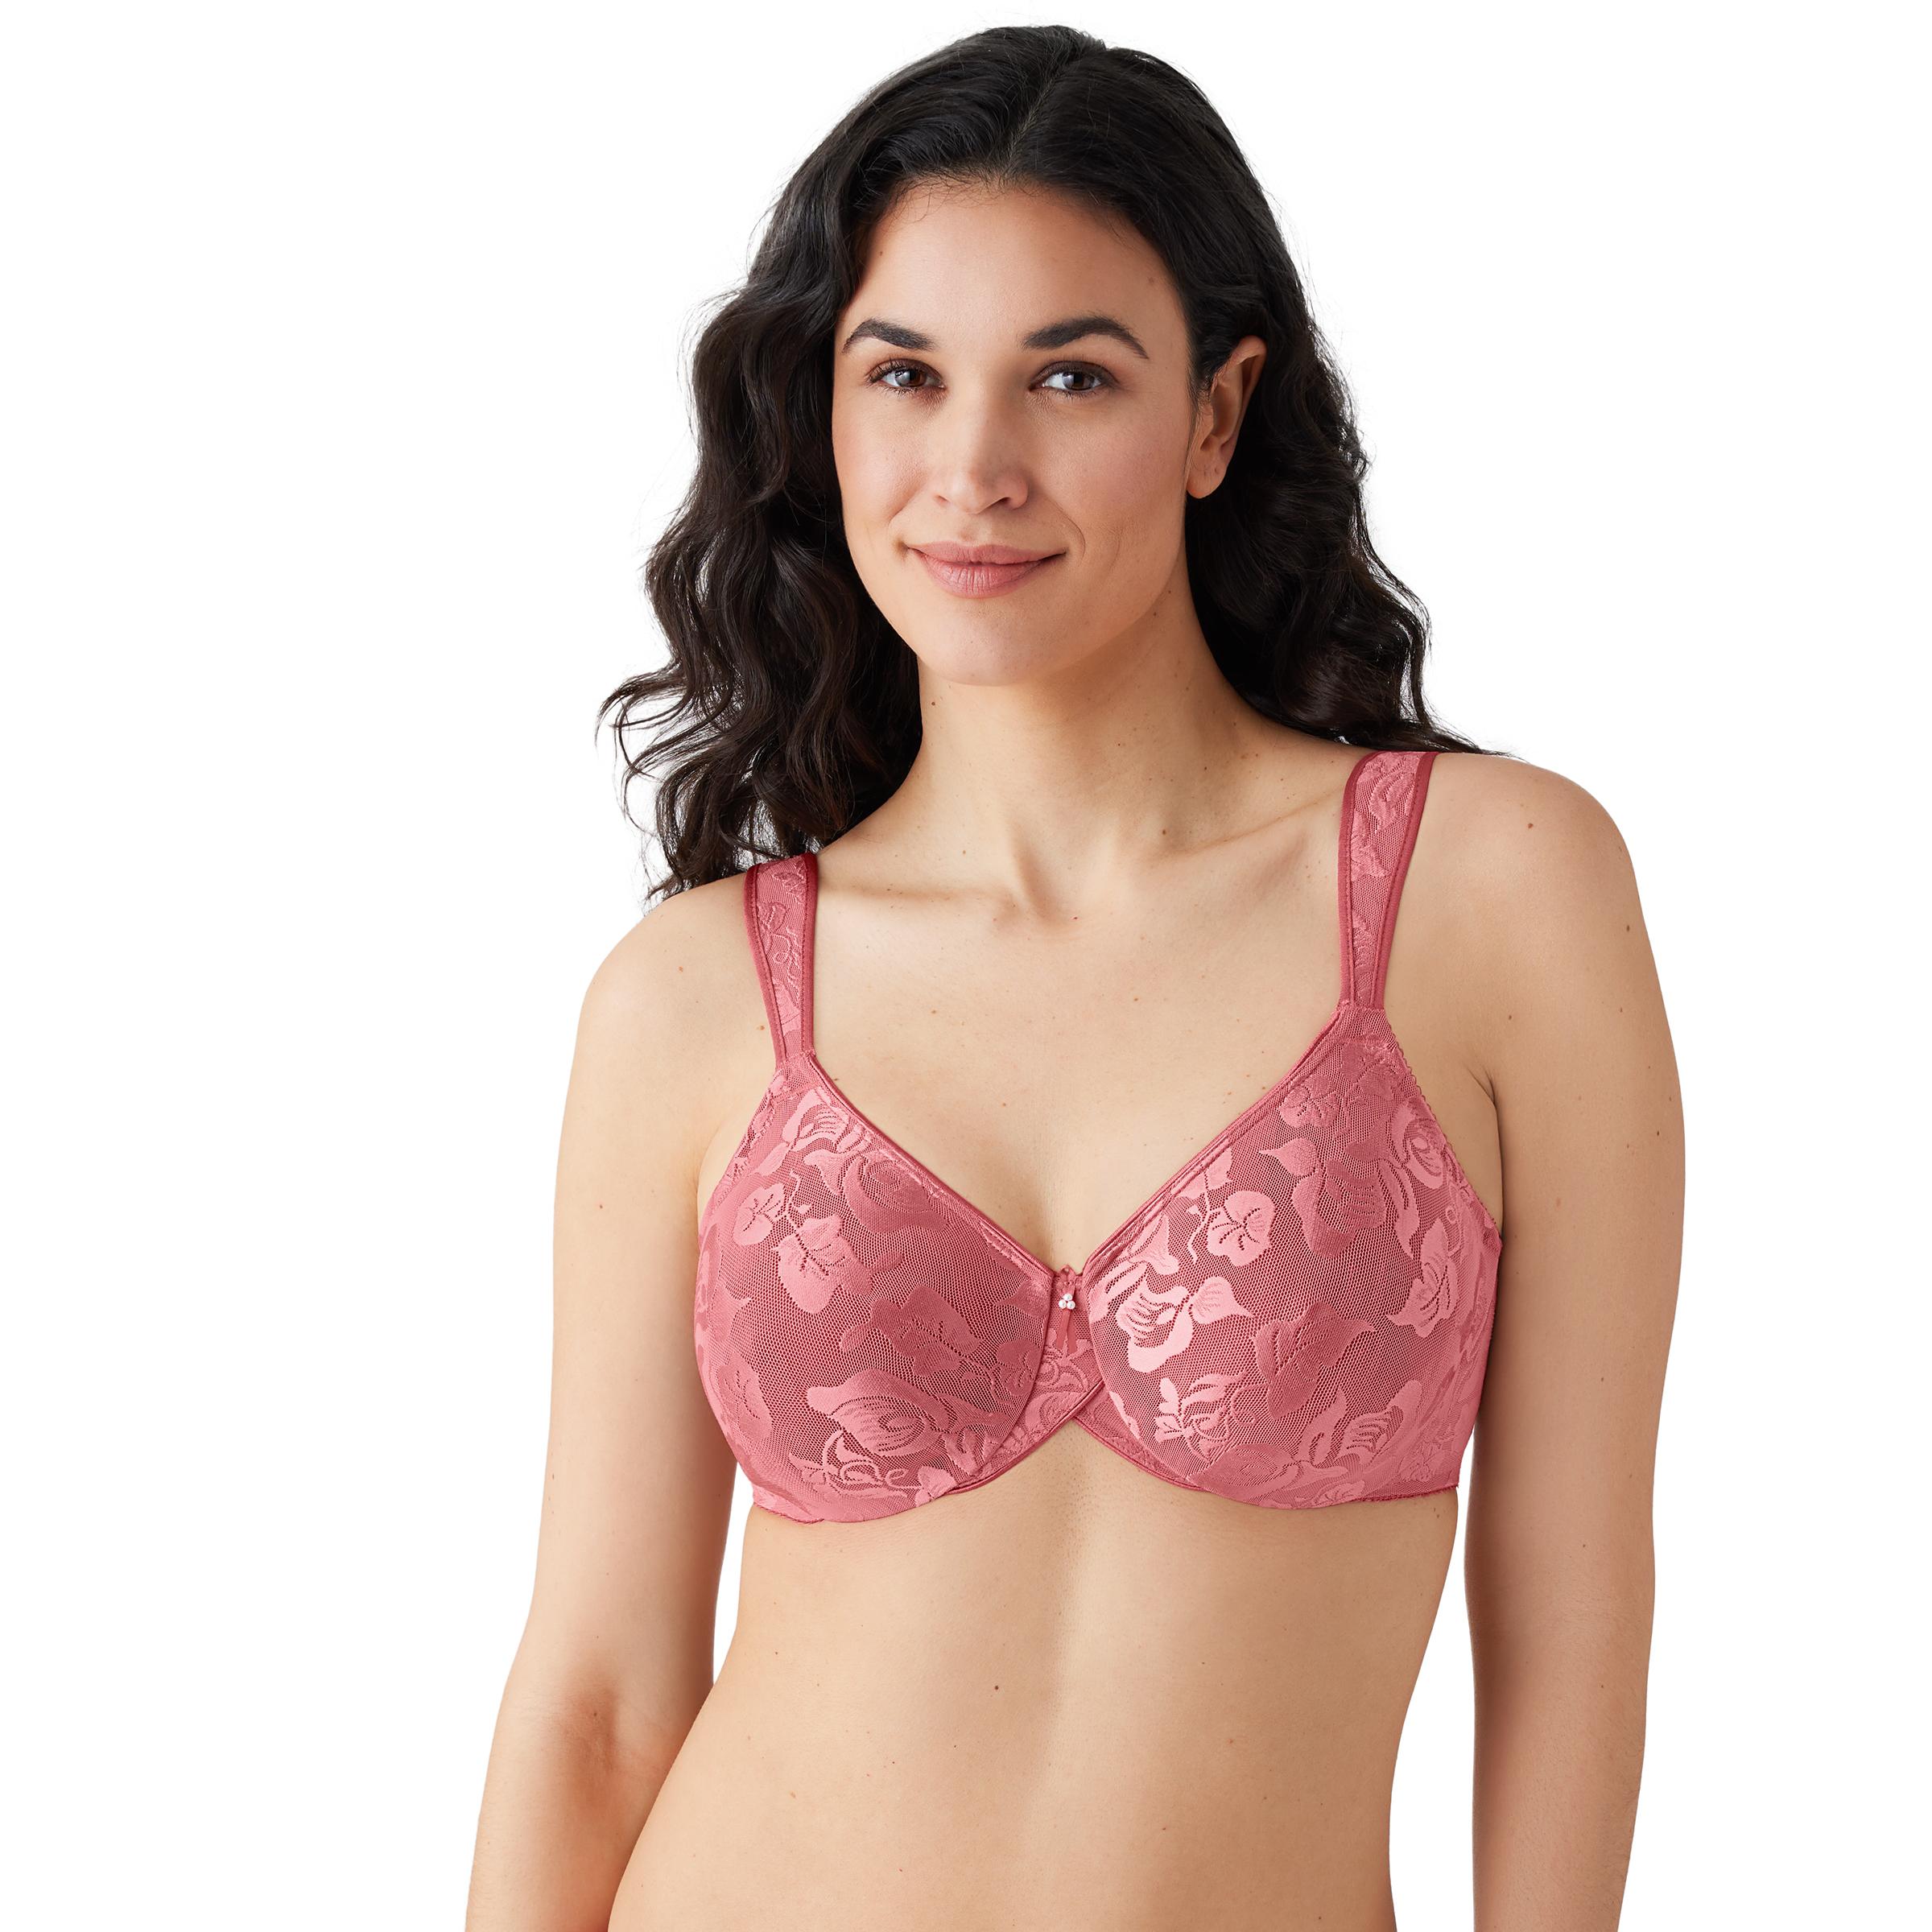 Wacoal 855367 Jacquard Underwire Bra various sizes colors new no tags